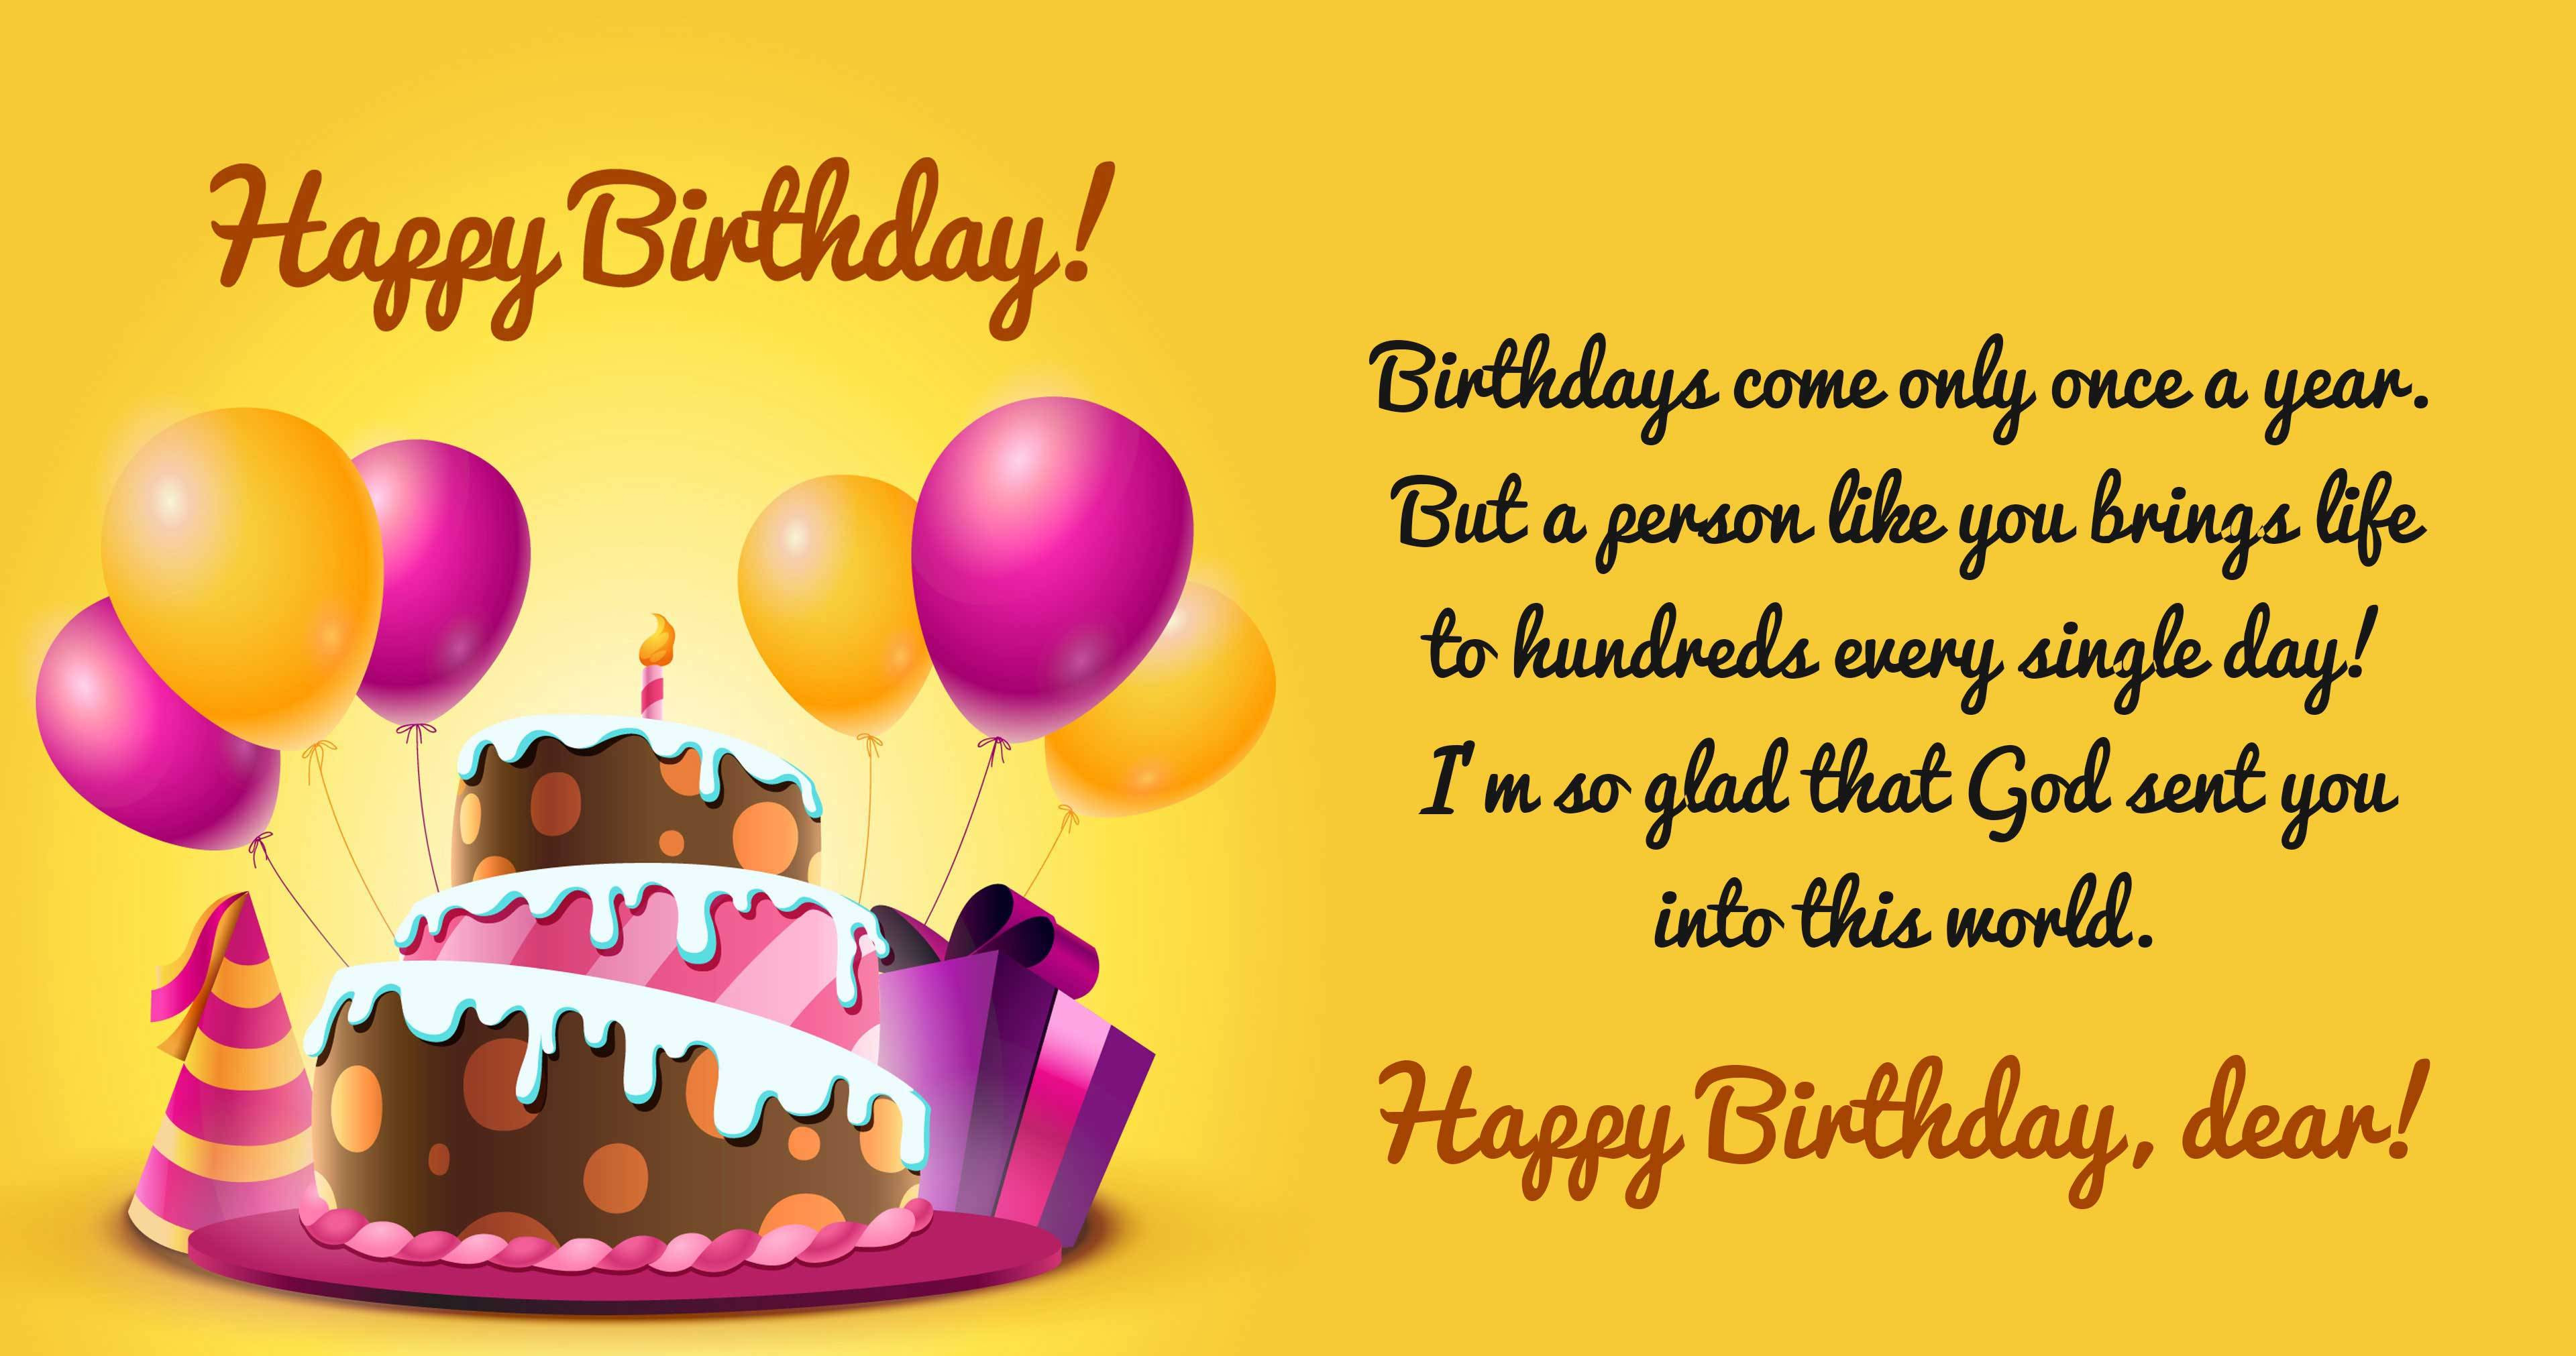 Quotes On Birthday
 Happy Birthday Quotes Sayings Wishes and Lines